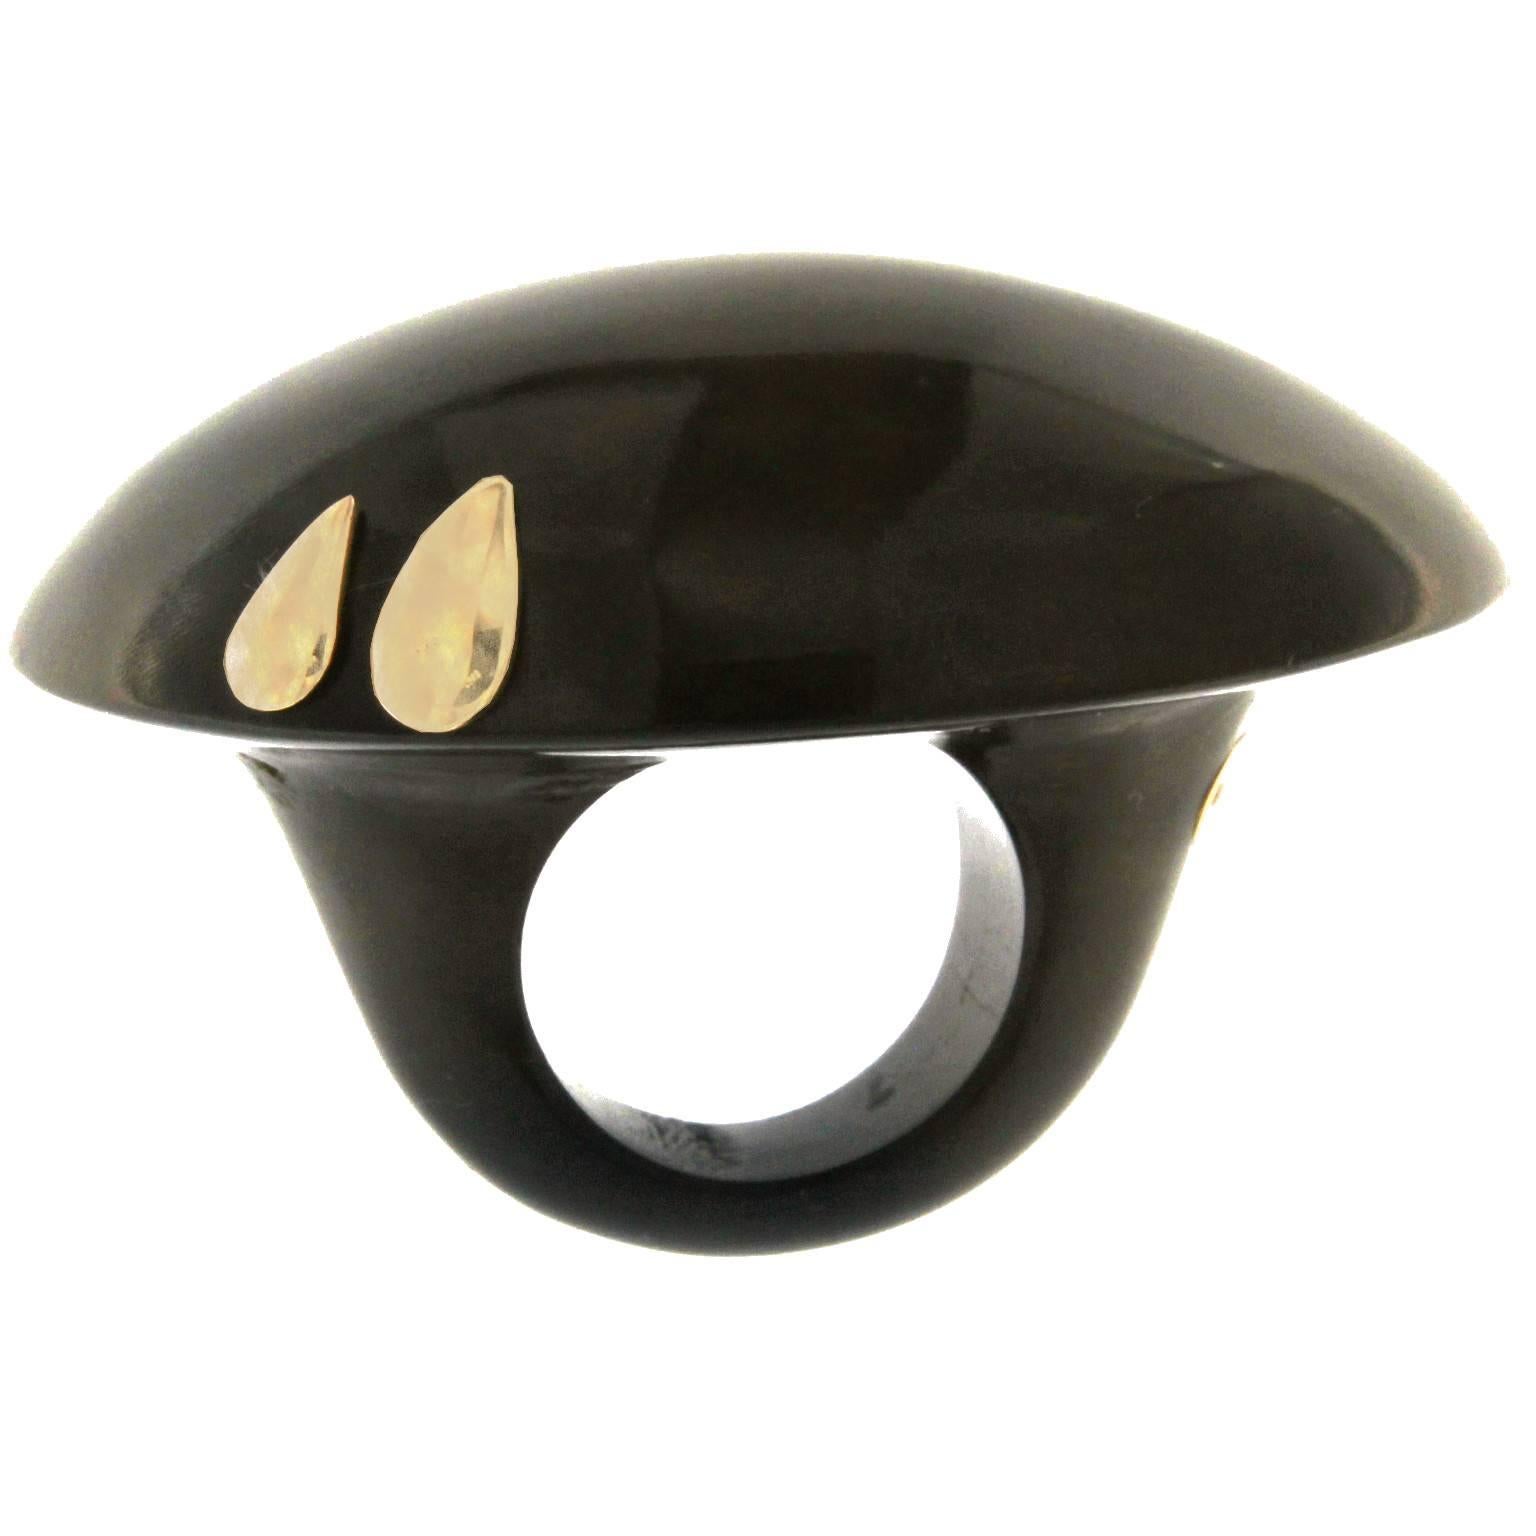 Bufalo horn ring in 18 kt yellow gold 

the total weight of the gold is 1.00

us size 6 3/4
STAMP: 10 MI ITALY 750

